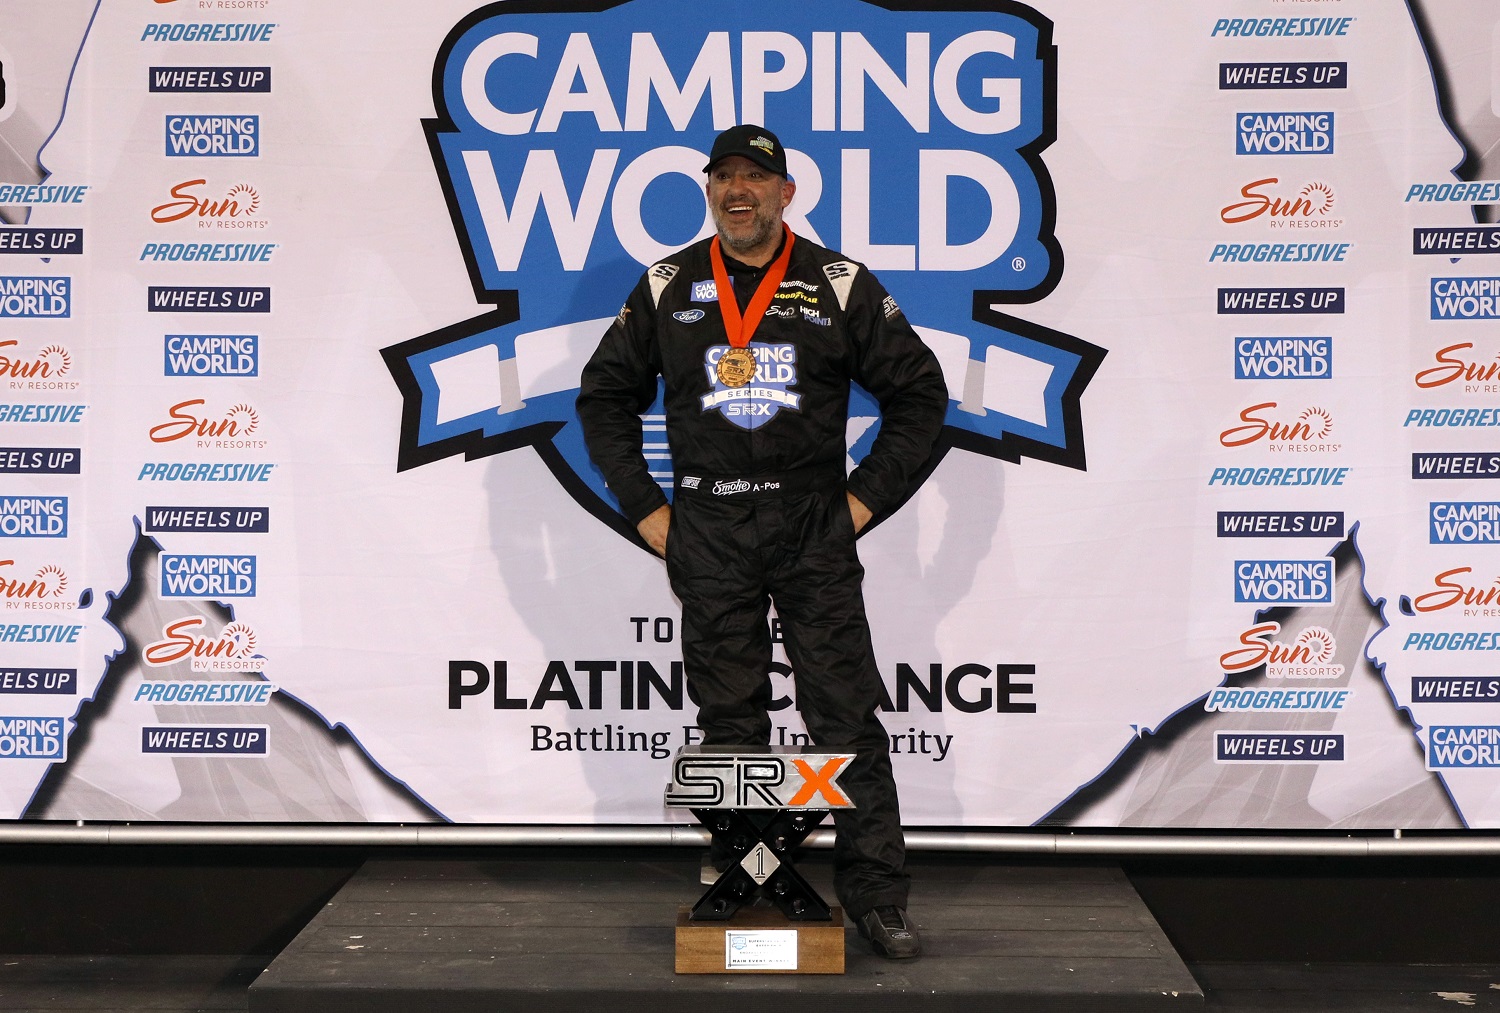 SRX driver Tony Stewart celebrates after winning the Camping World Superstar Racing Experience event at Knoxville Raceway on June 19, 2021.